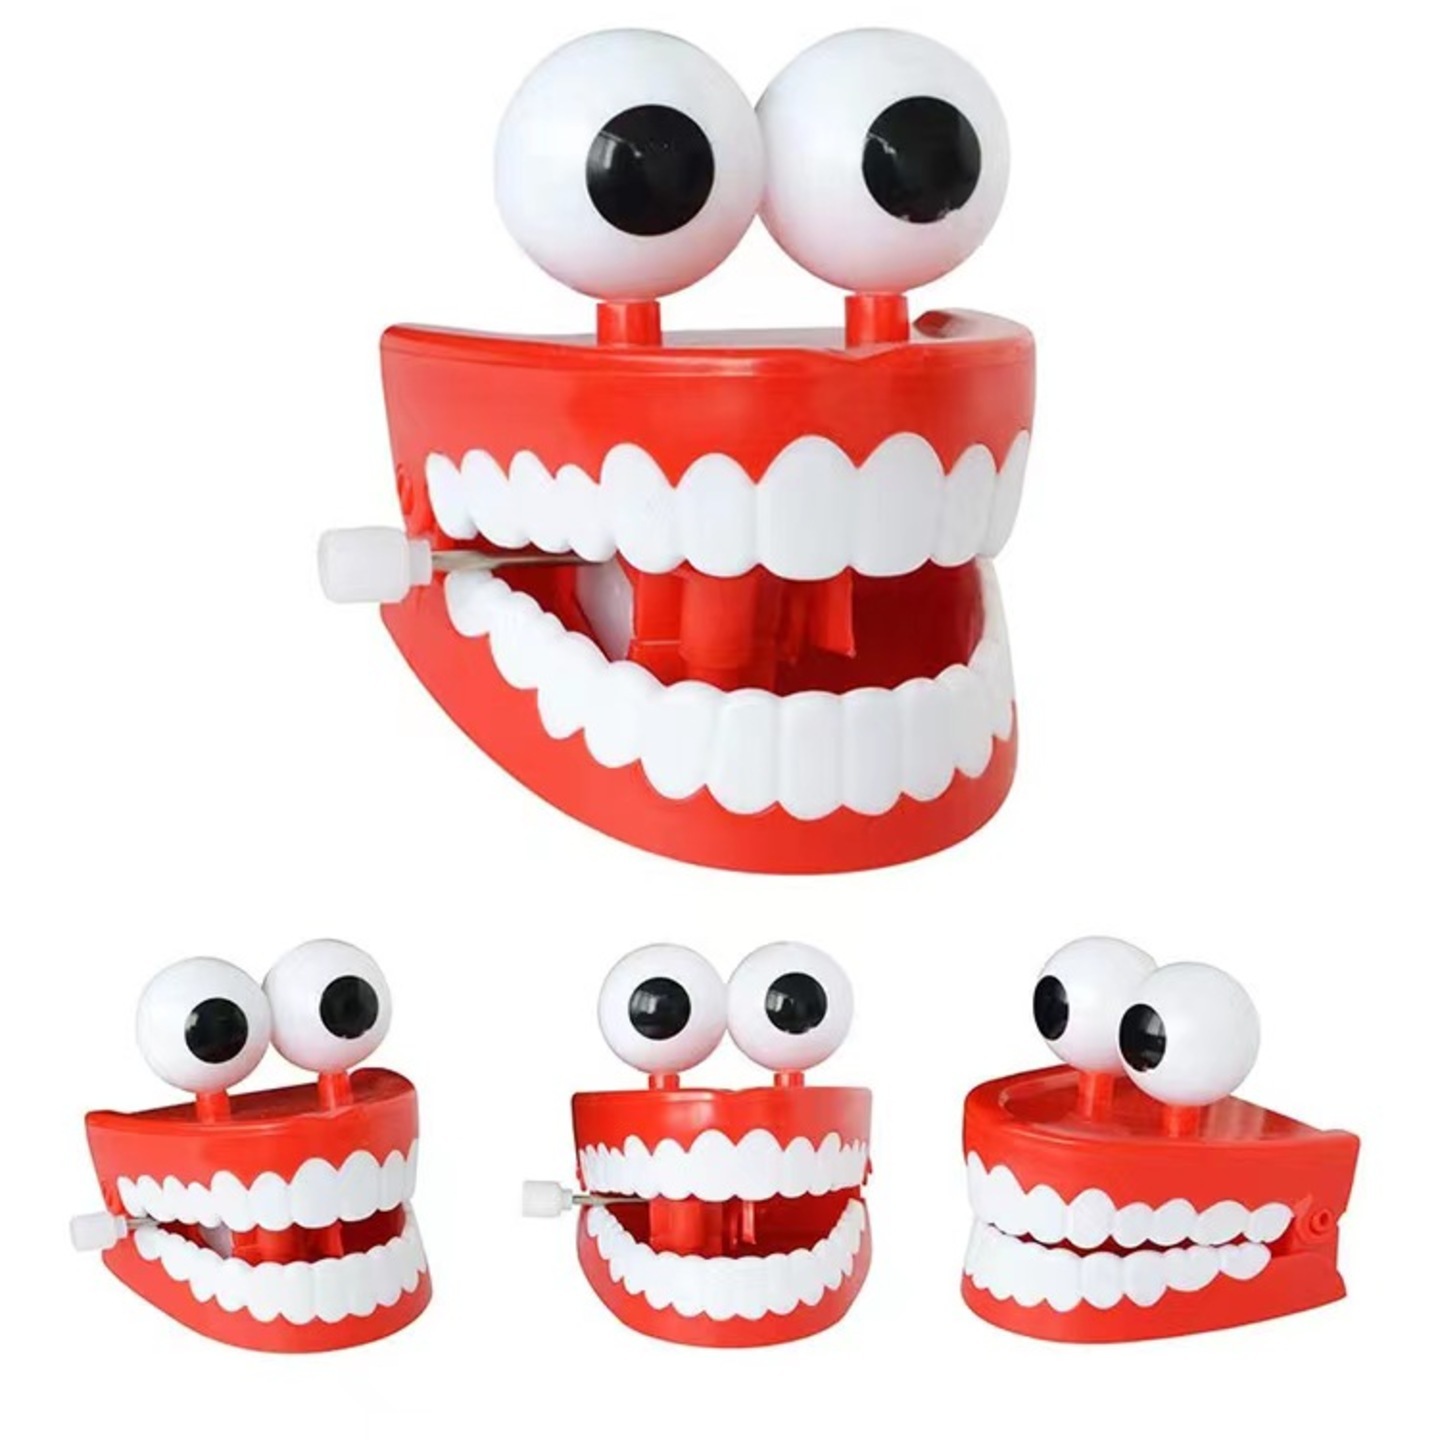 Wind up chatttering and jumping teeth funny novelty toy